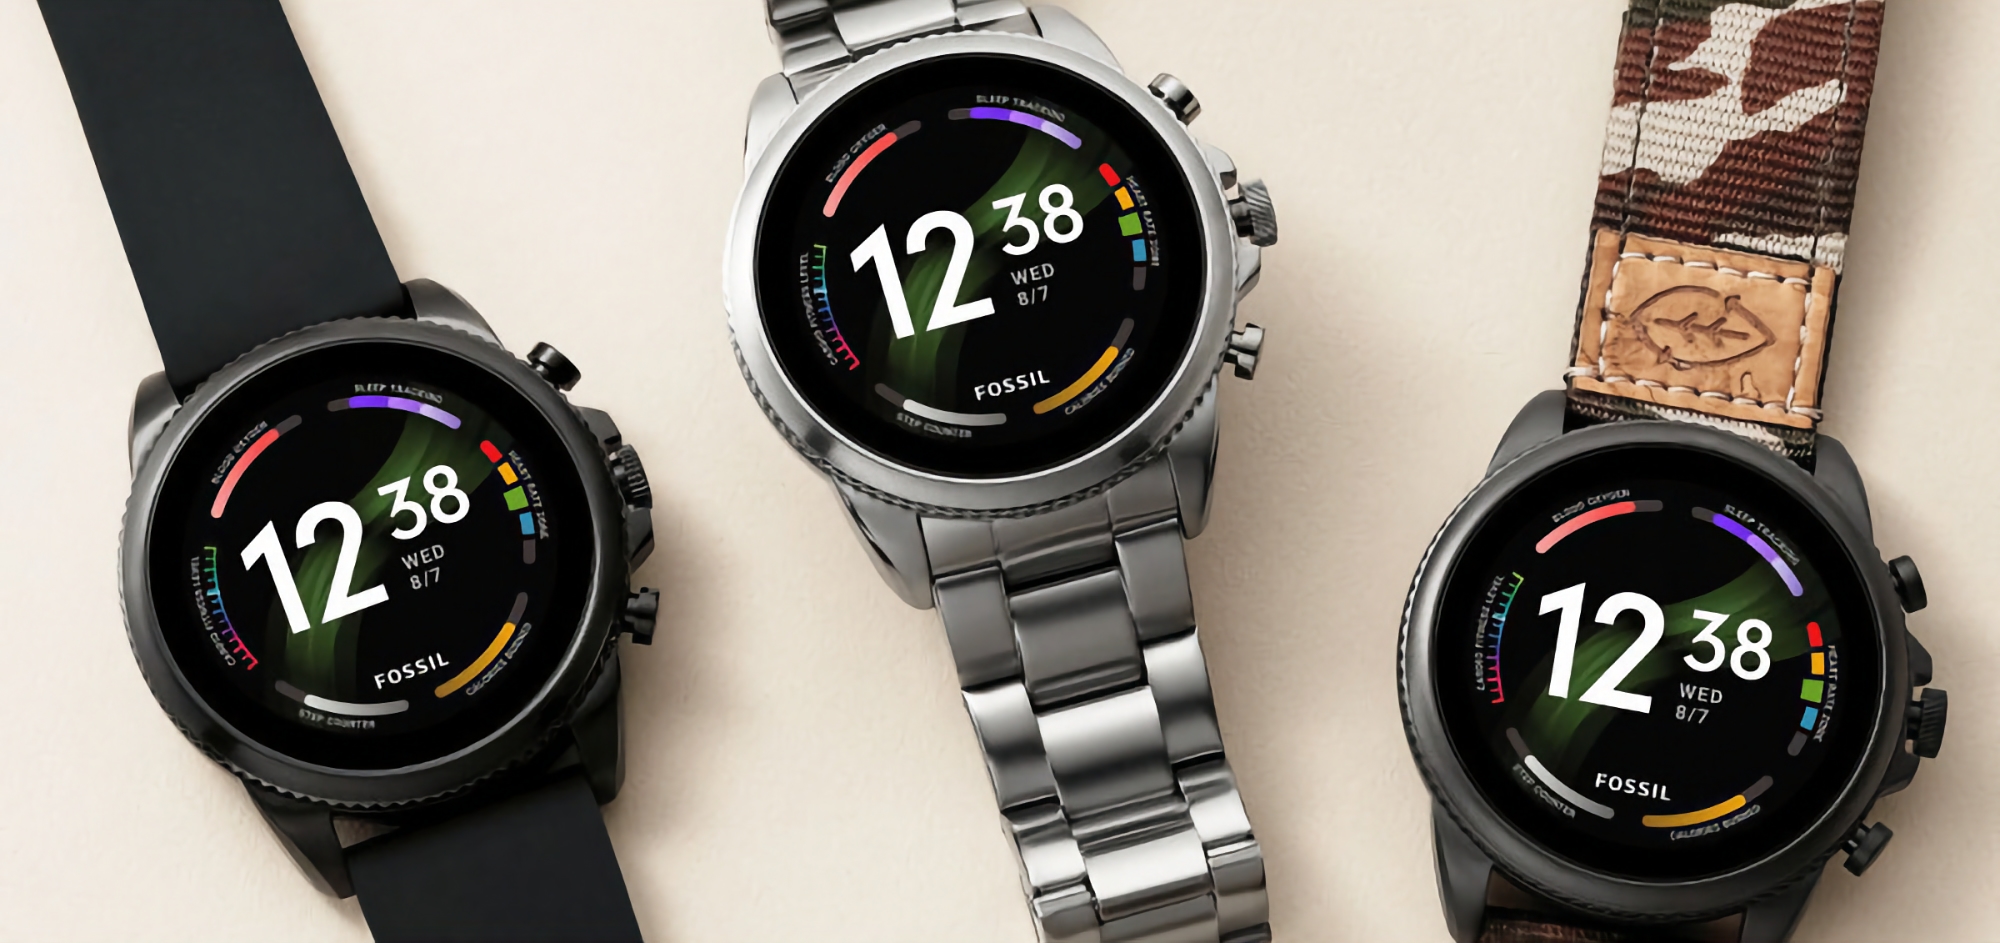 The Fossil Gen 6 with a 44mm case, SpO2 sensor and NFC is available on Amazon for $151 off